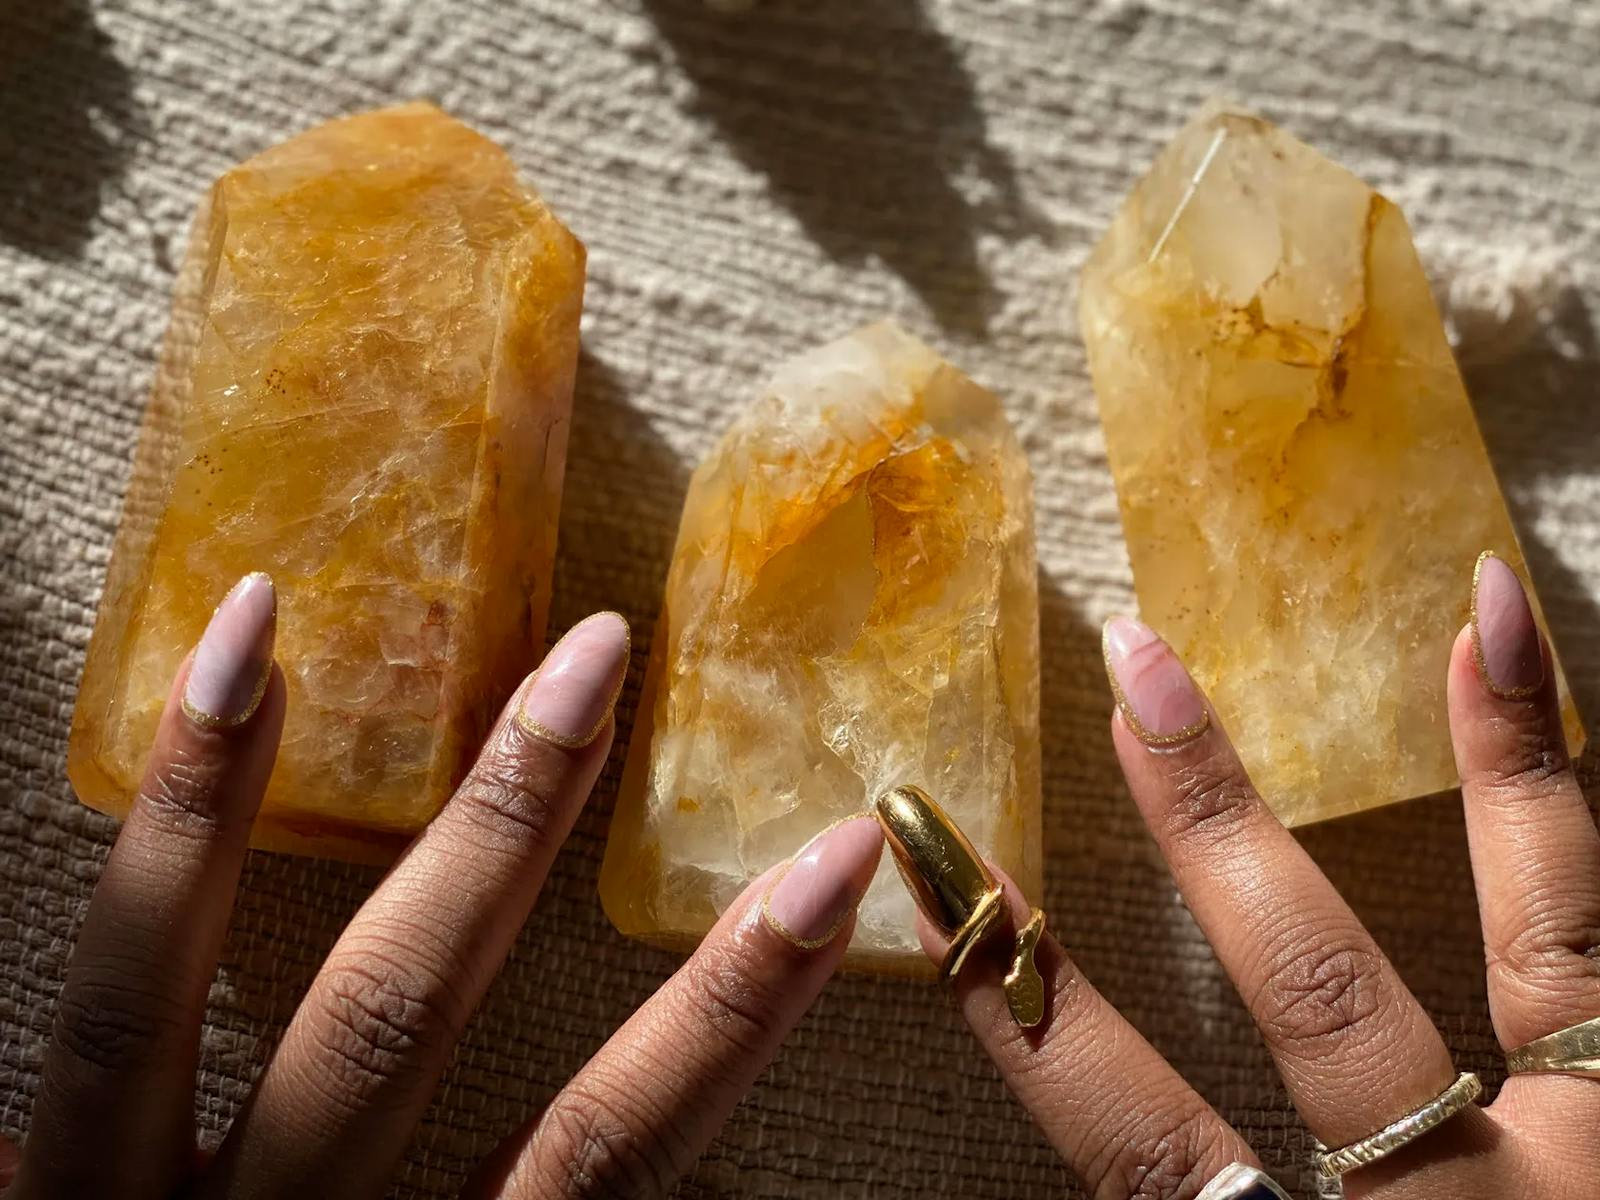 COVETEUR: The Benefits of Crystal Healing